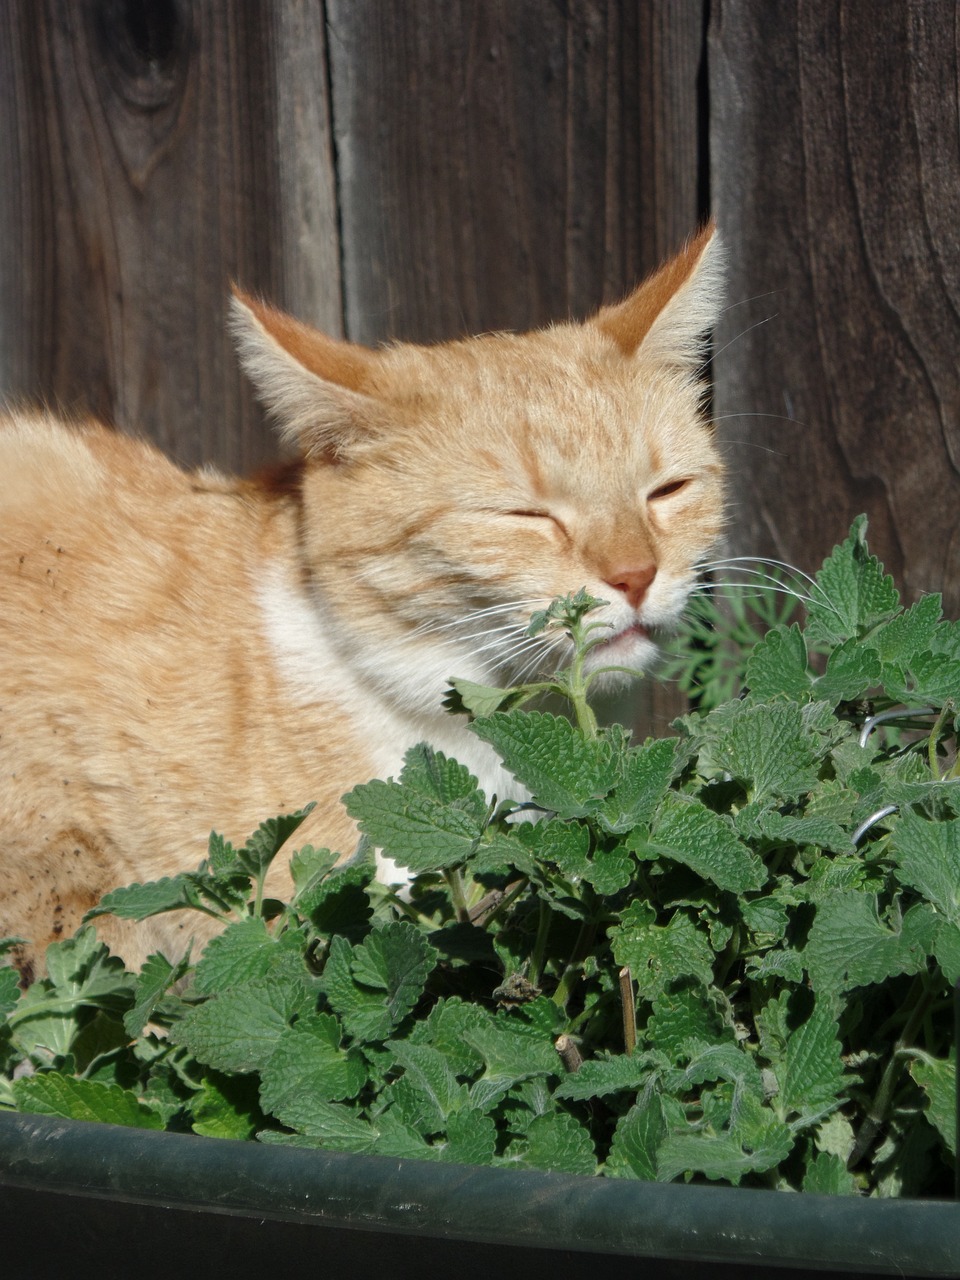 An orange cat with eyes closed sniffing a catnip plant.